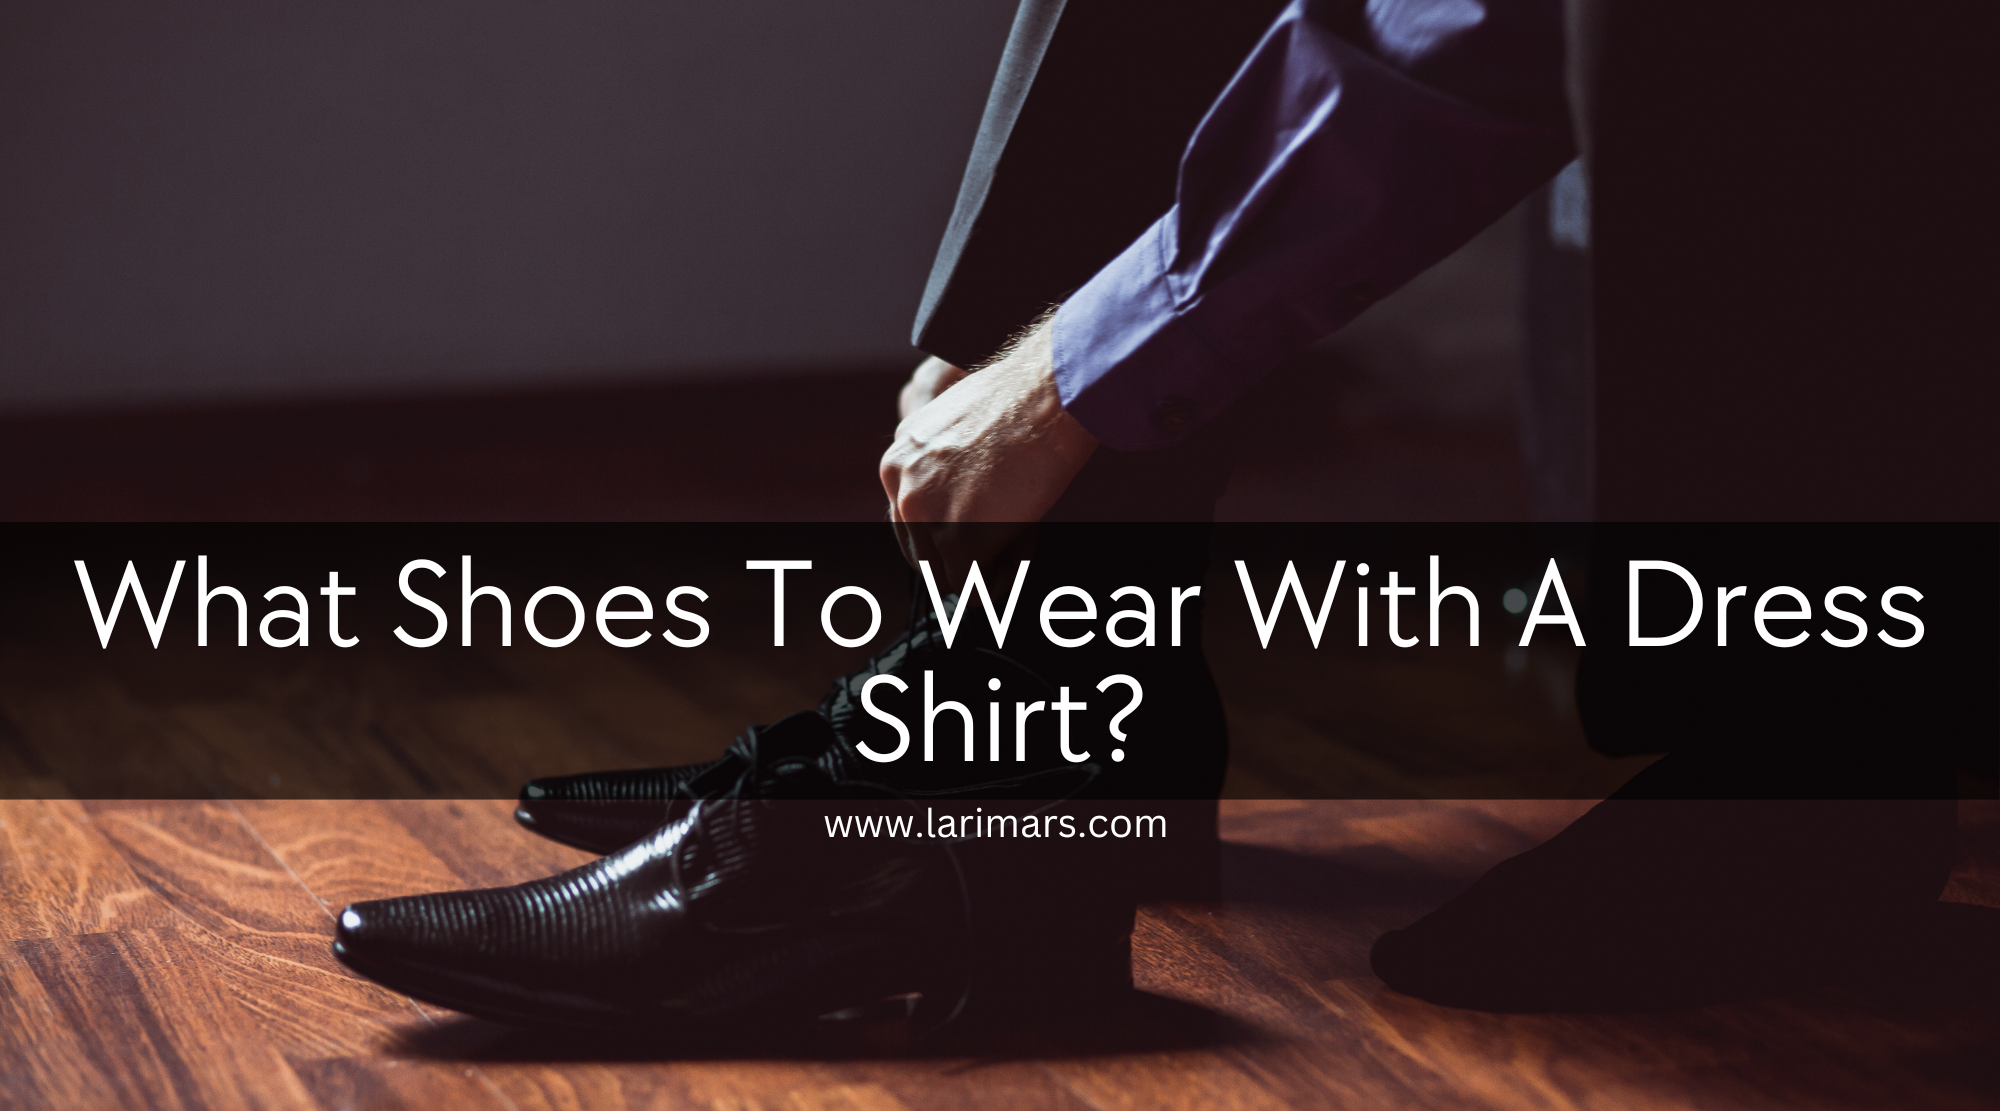 Shoes To Wear With A Dress Shirt